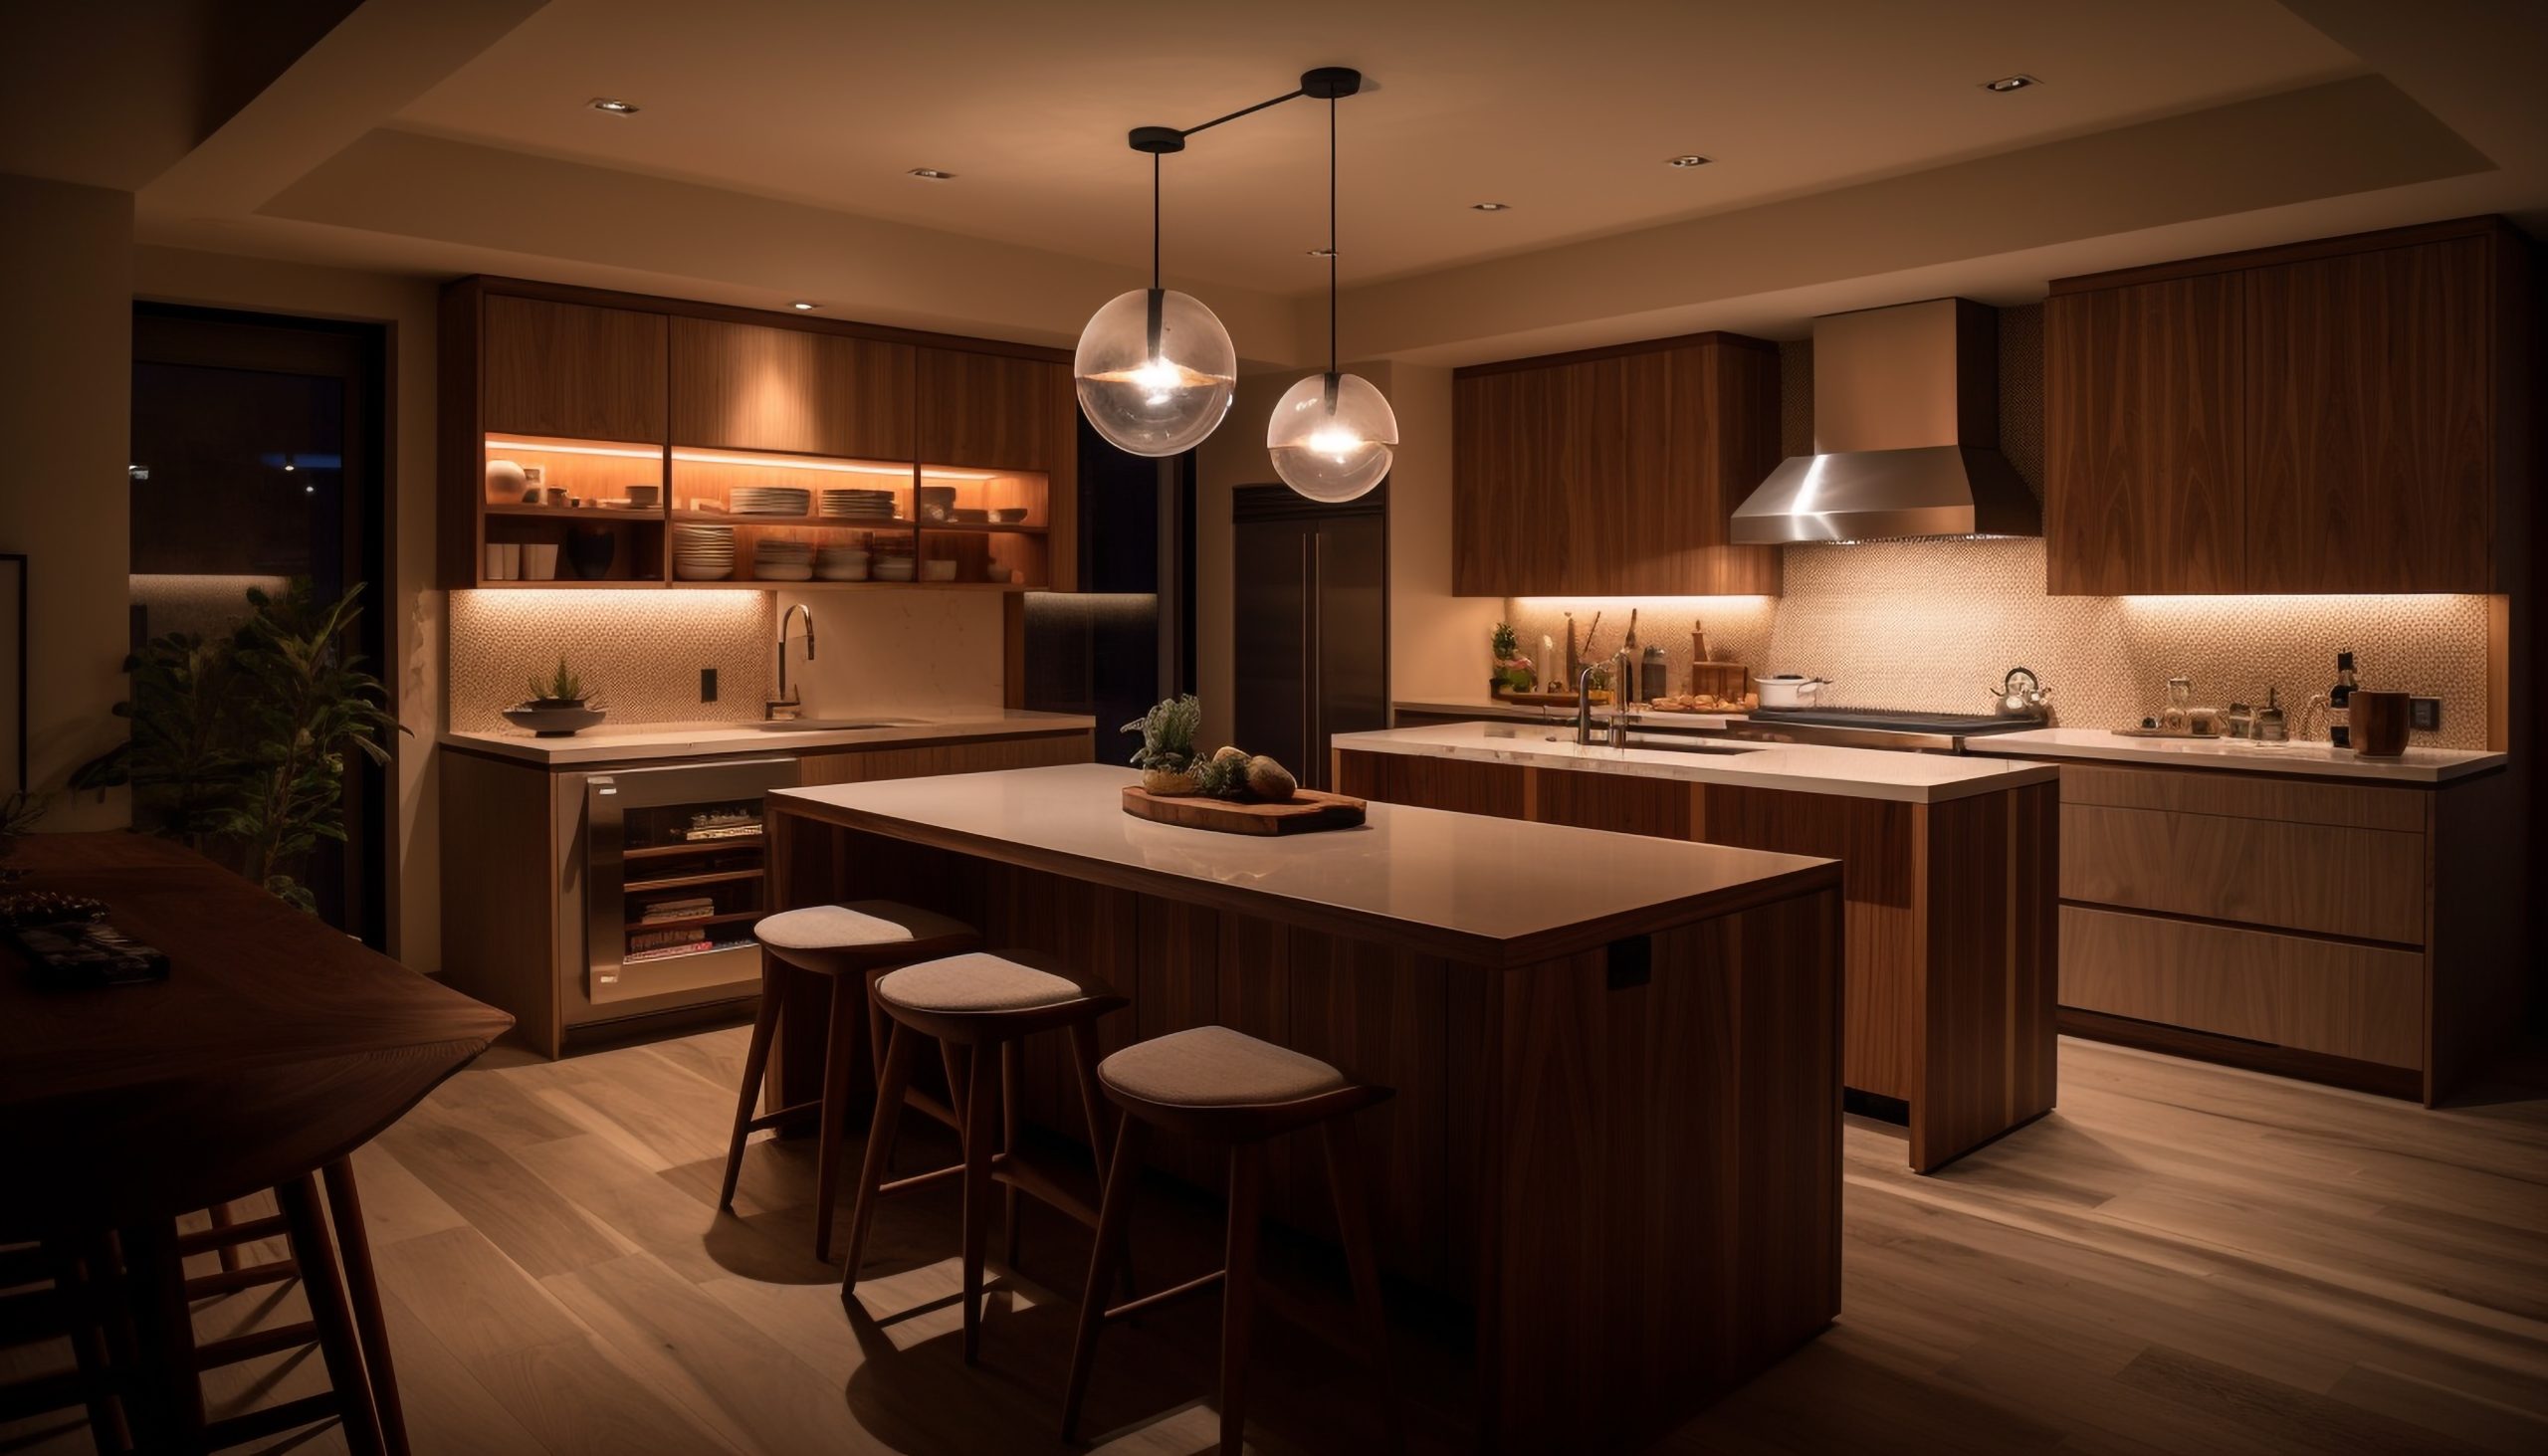 What are the Types of Lighting Fixtures for Kitchen Design Tips to utilize Kitchen Lighting